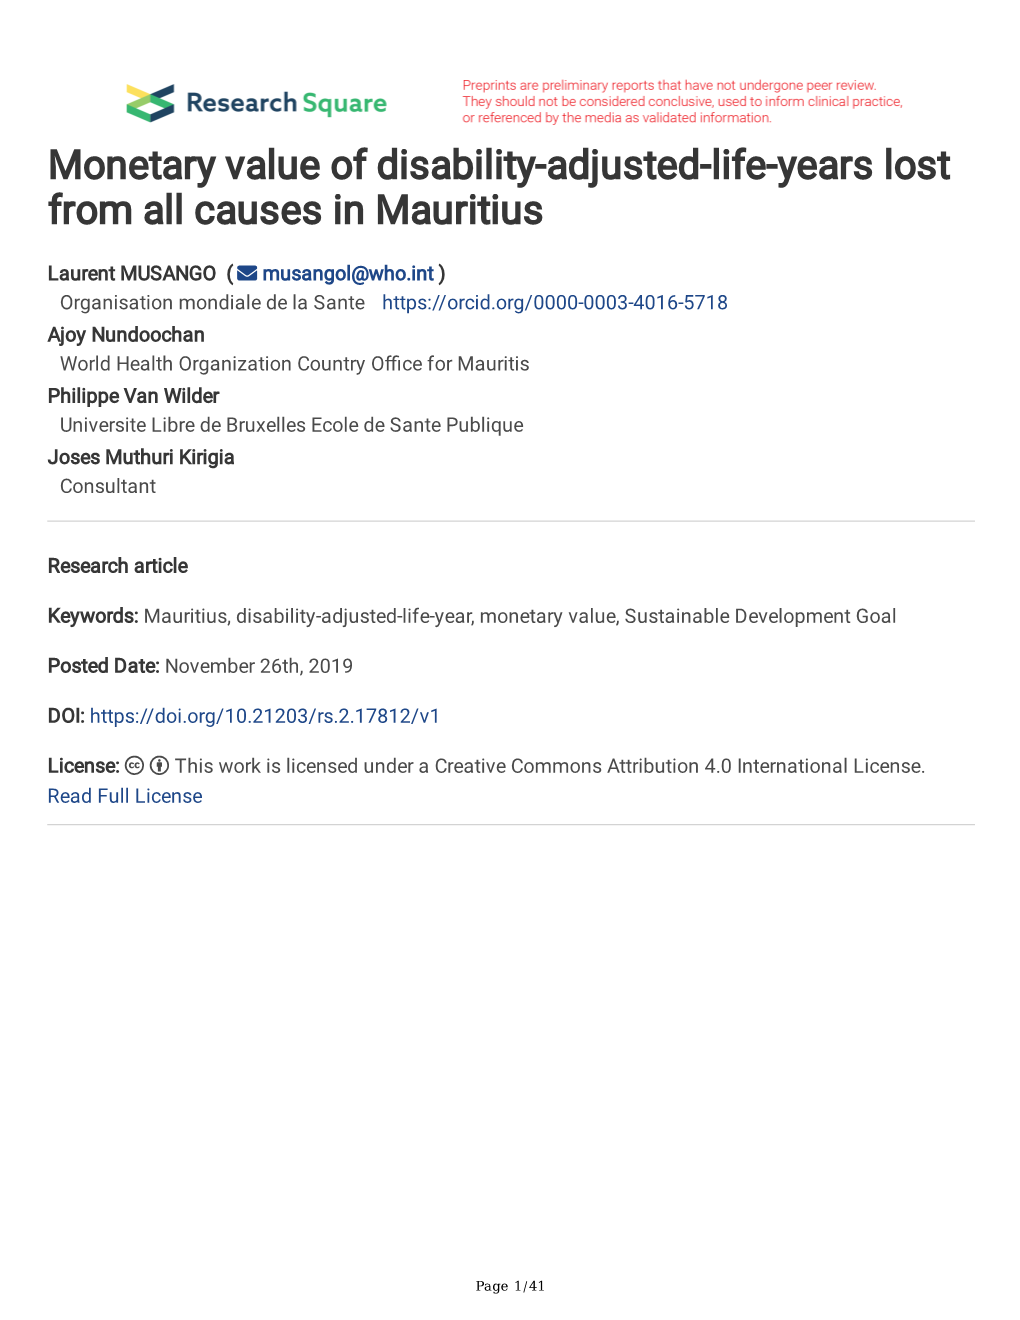 Monetary Value of Disability-Adjusted-Life-Years Lost from All Causes in Mauritius